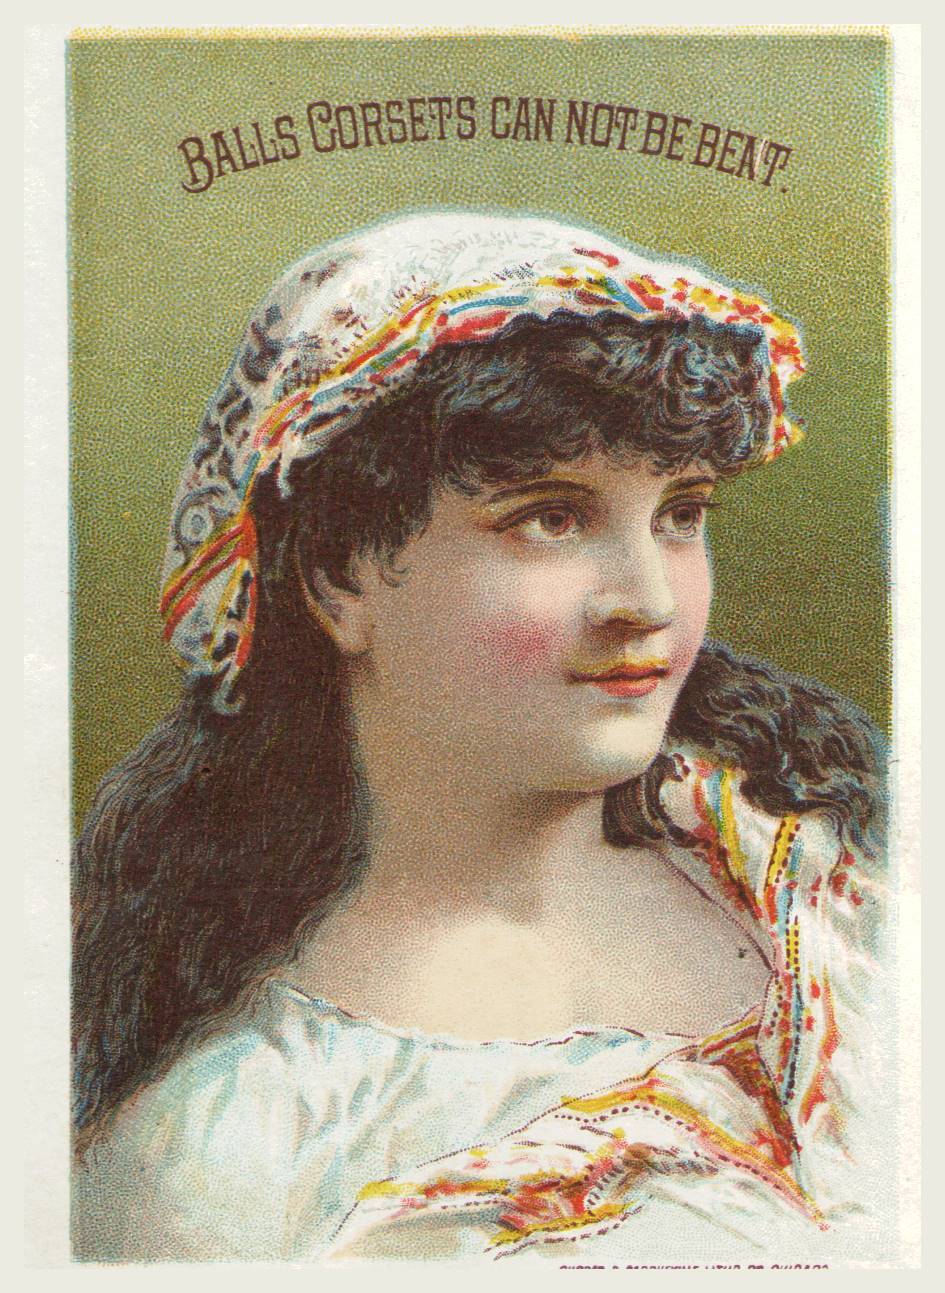 Antique Balls Corsets CANNOT BE BEAT - VICTORIAN TRADE CARD Greenfield, Ohio